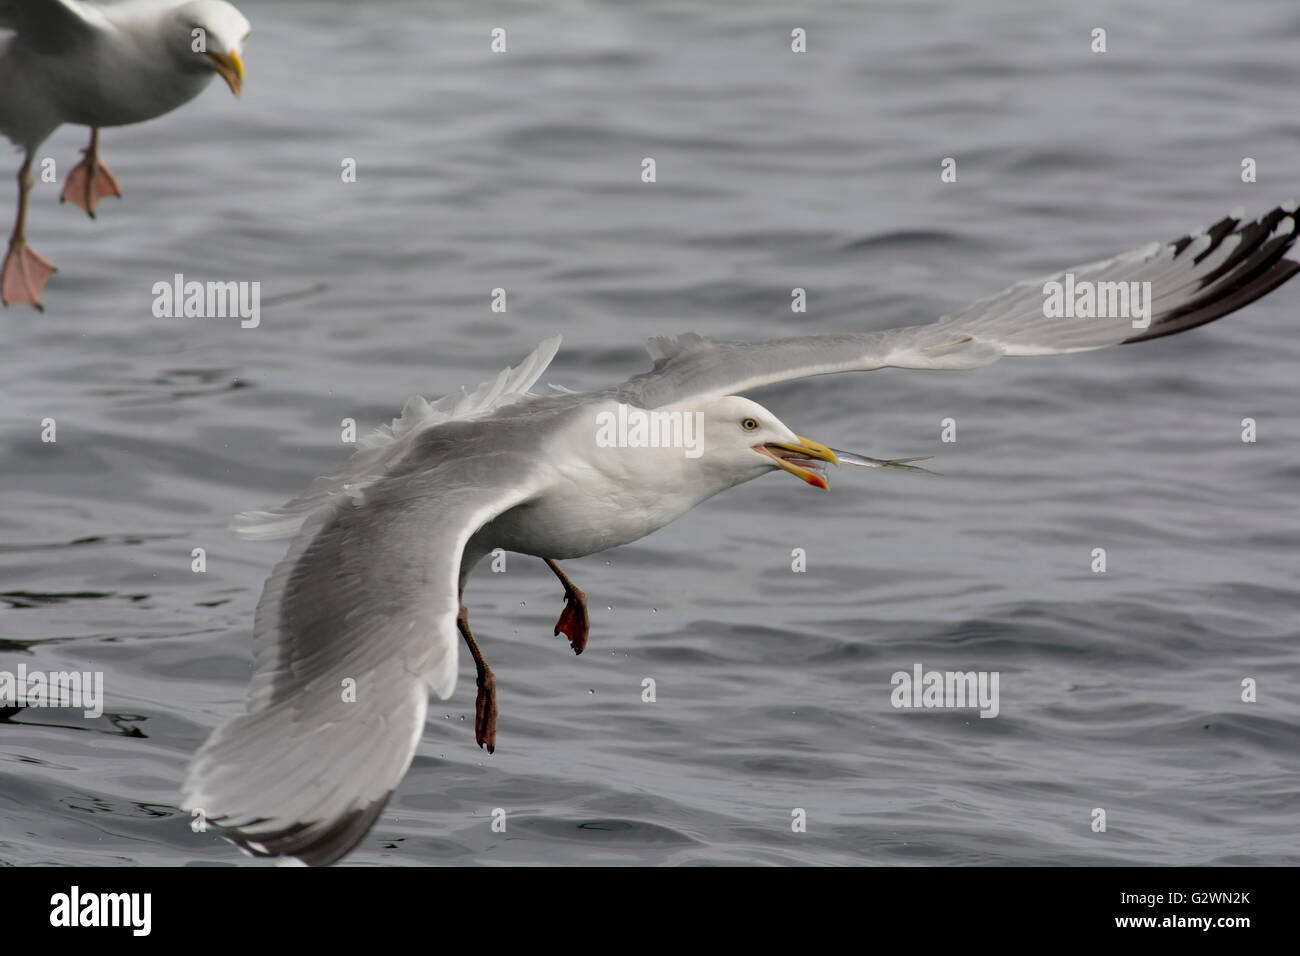 Herring gull taking flight after catching a fish in the sea and being chased by another gull Stock Photo